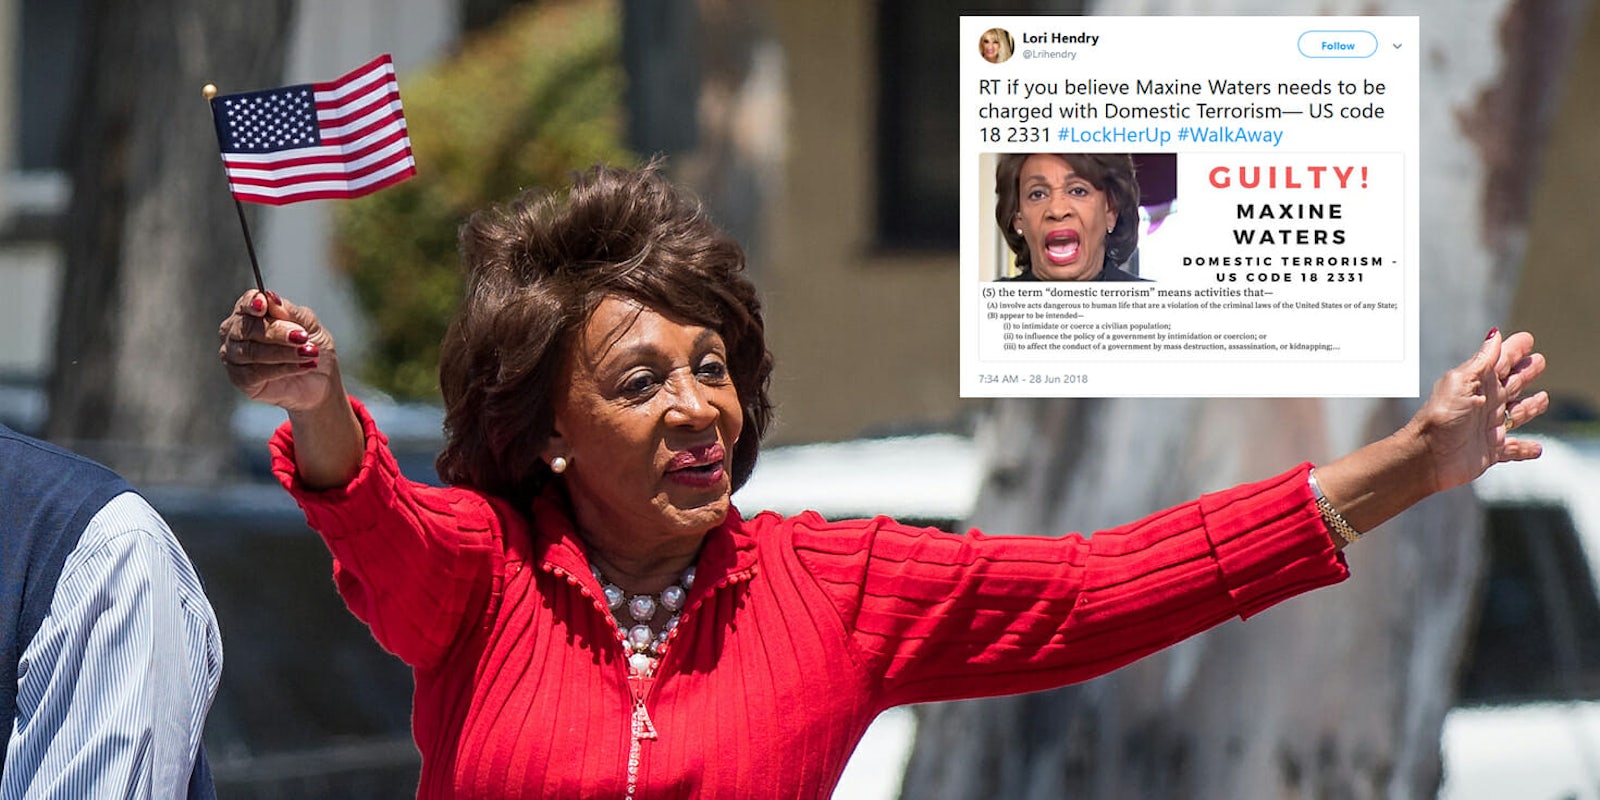 Some conservatives are calling for Rep. Maxine Waters (D-Calif.) to be arrested.